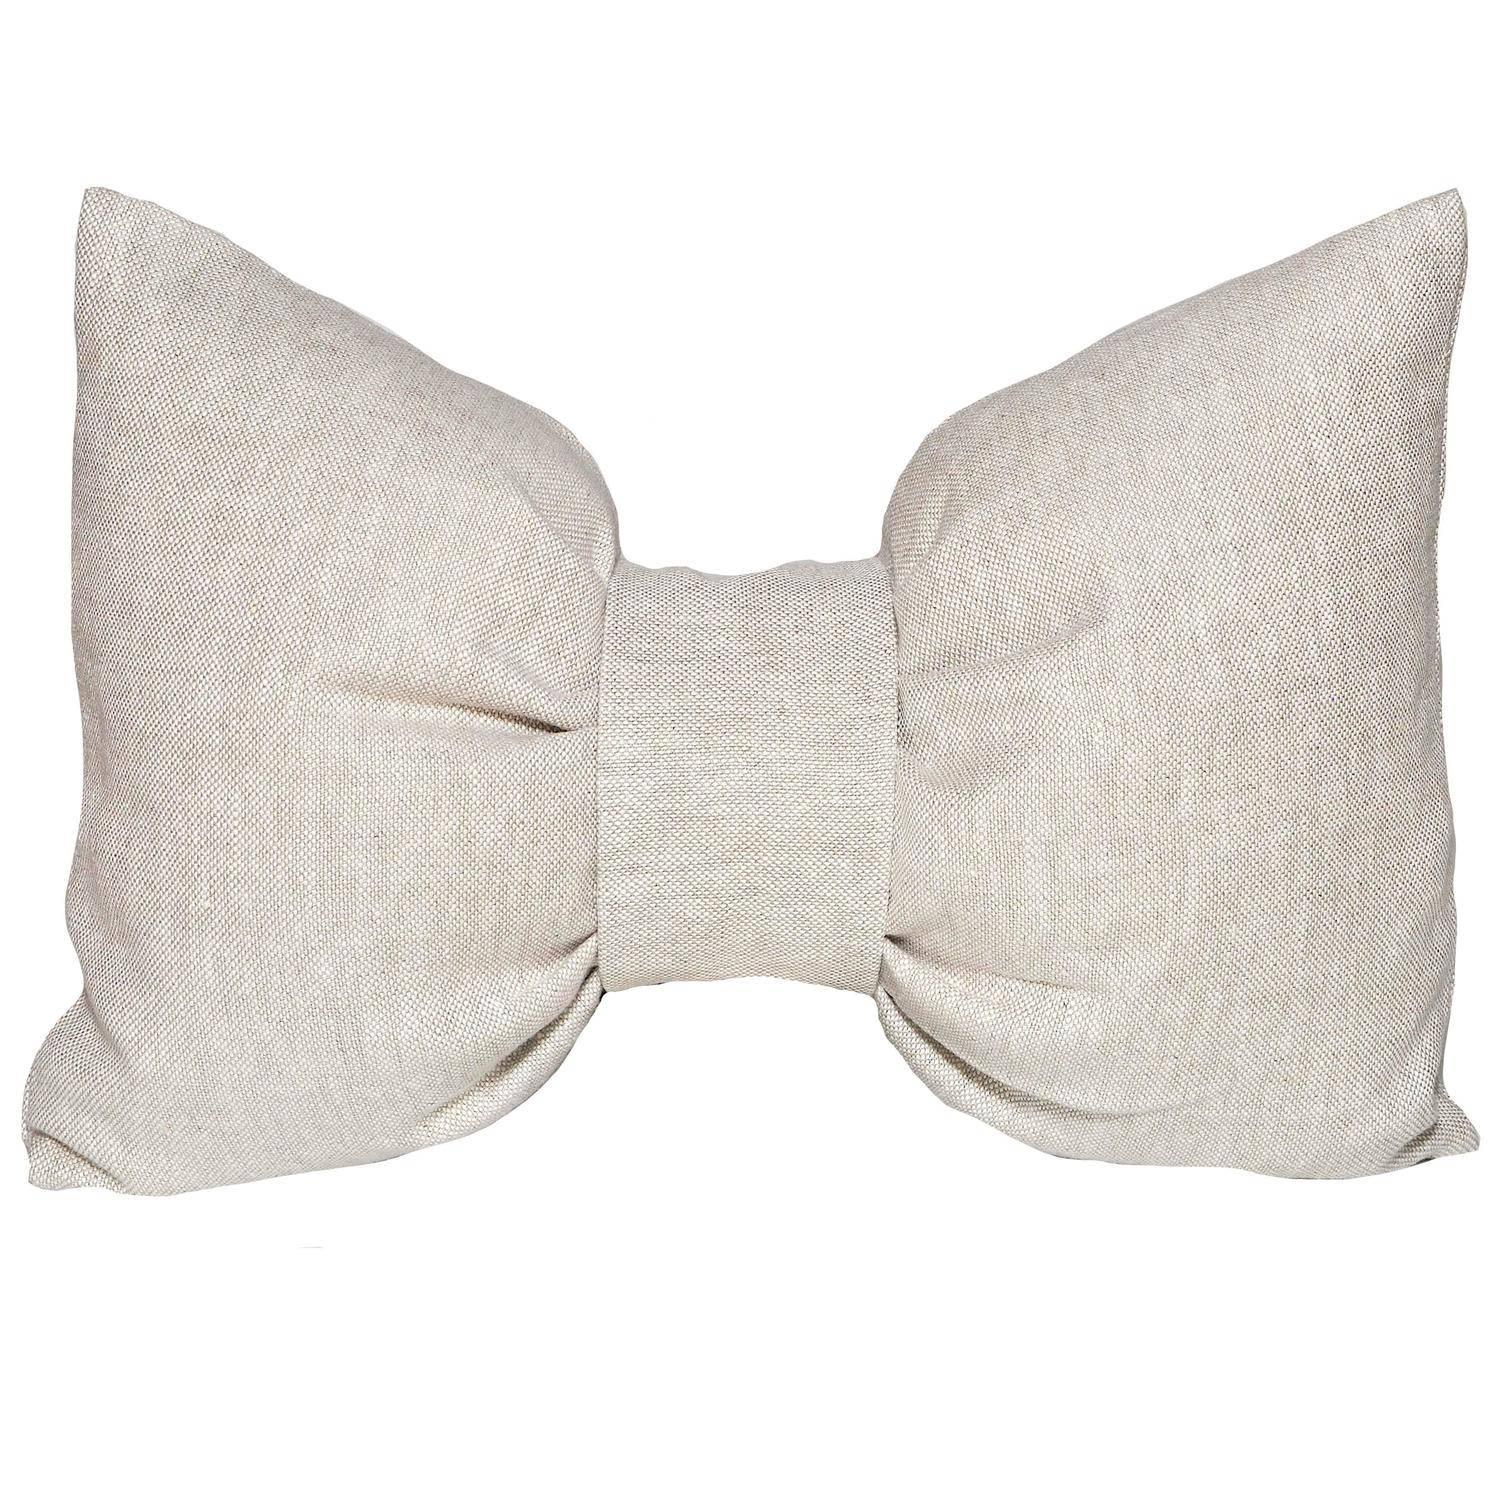 Northern Irish Pair of Large Designer Bow Pillows in Vintage Irish Linen Natural Oatmeal For Sale